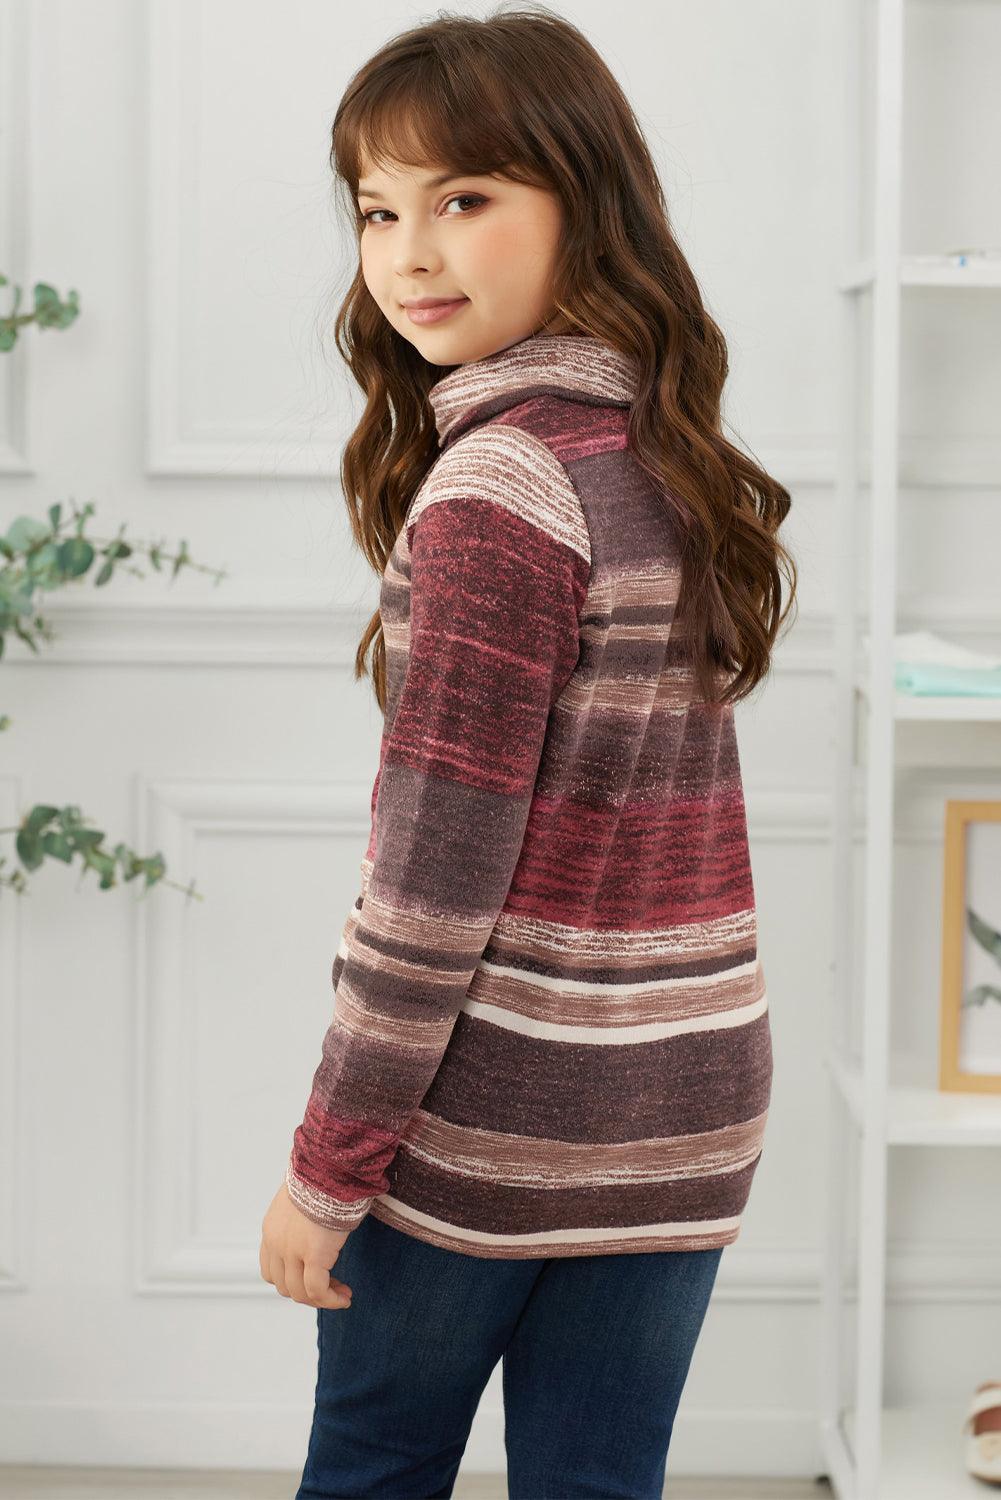 Girls Striped Cowl Neck Top with Pockets - Flyclothing LLC